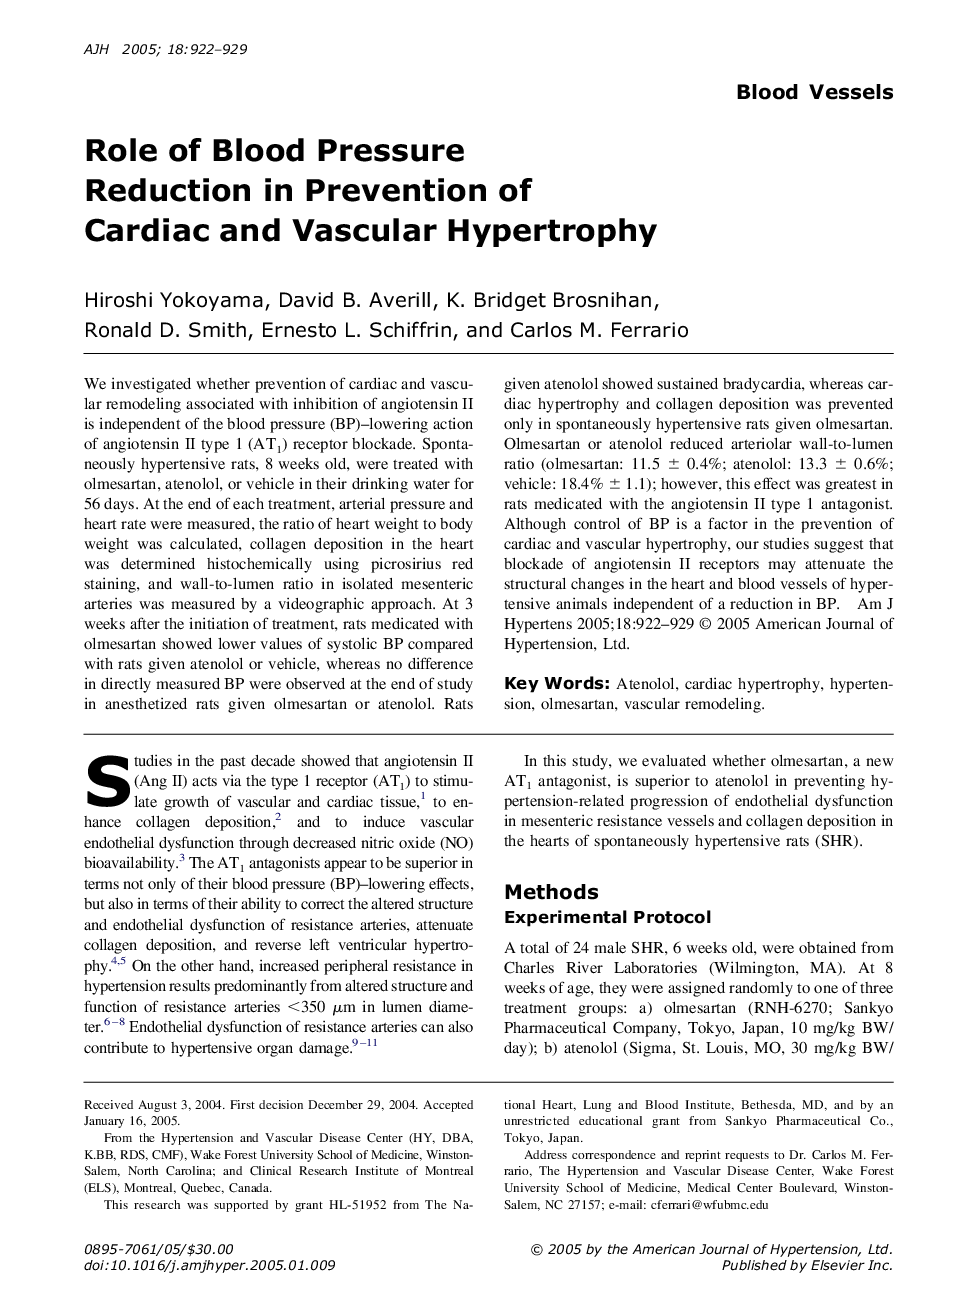 Role of Blood Pressure Reduction in Prevention of Cardiac and Vascular Hypertrophy